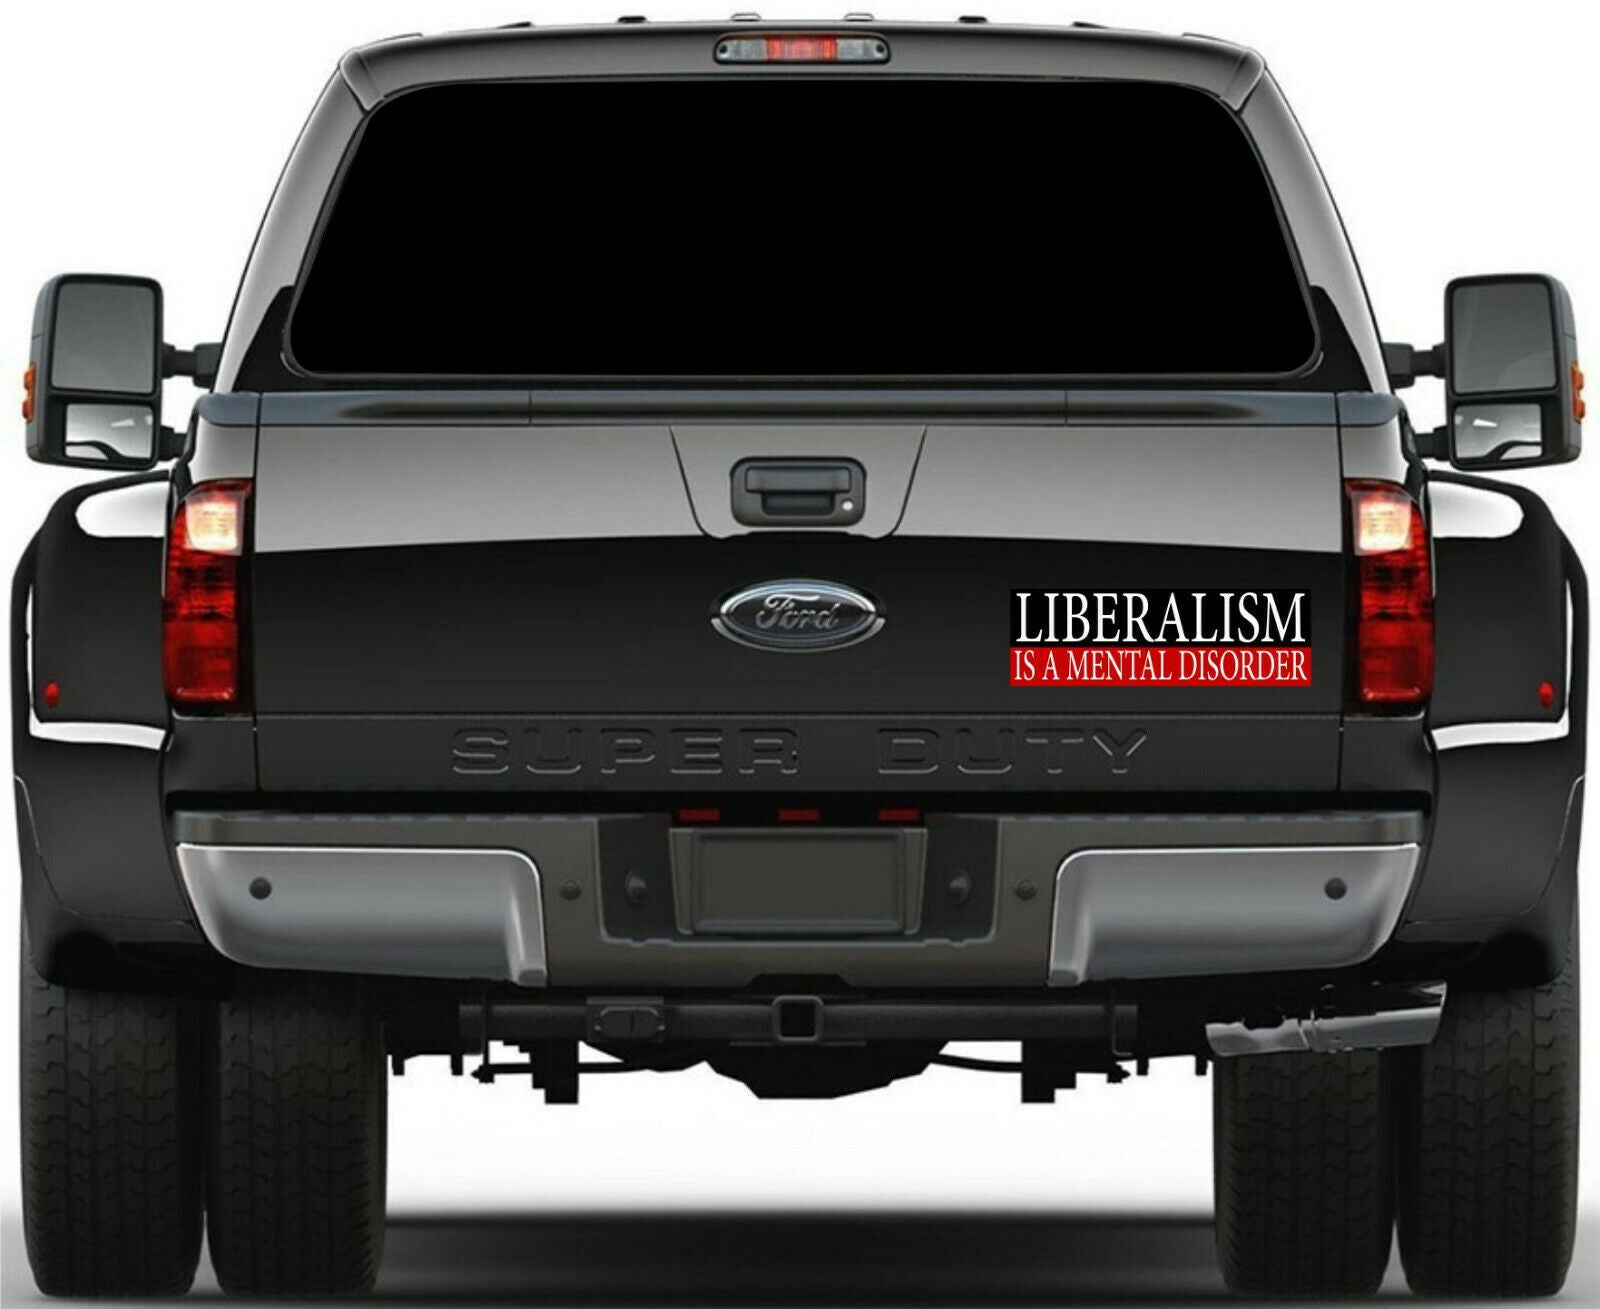 Liberalism is a Mental Disorder Conservative 2 Funny Bumper Stickers 8.8" X 3" - Powercall Sirens LLC